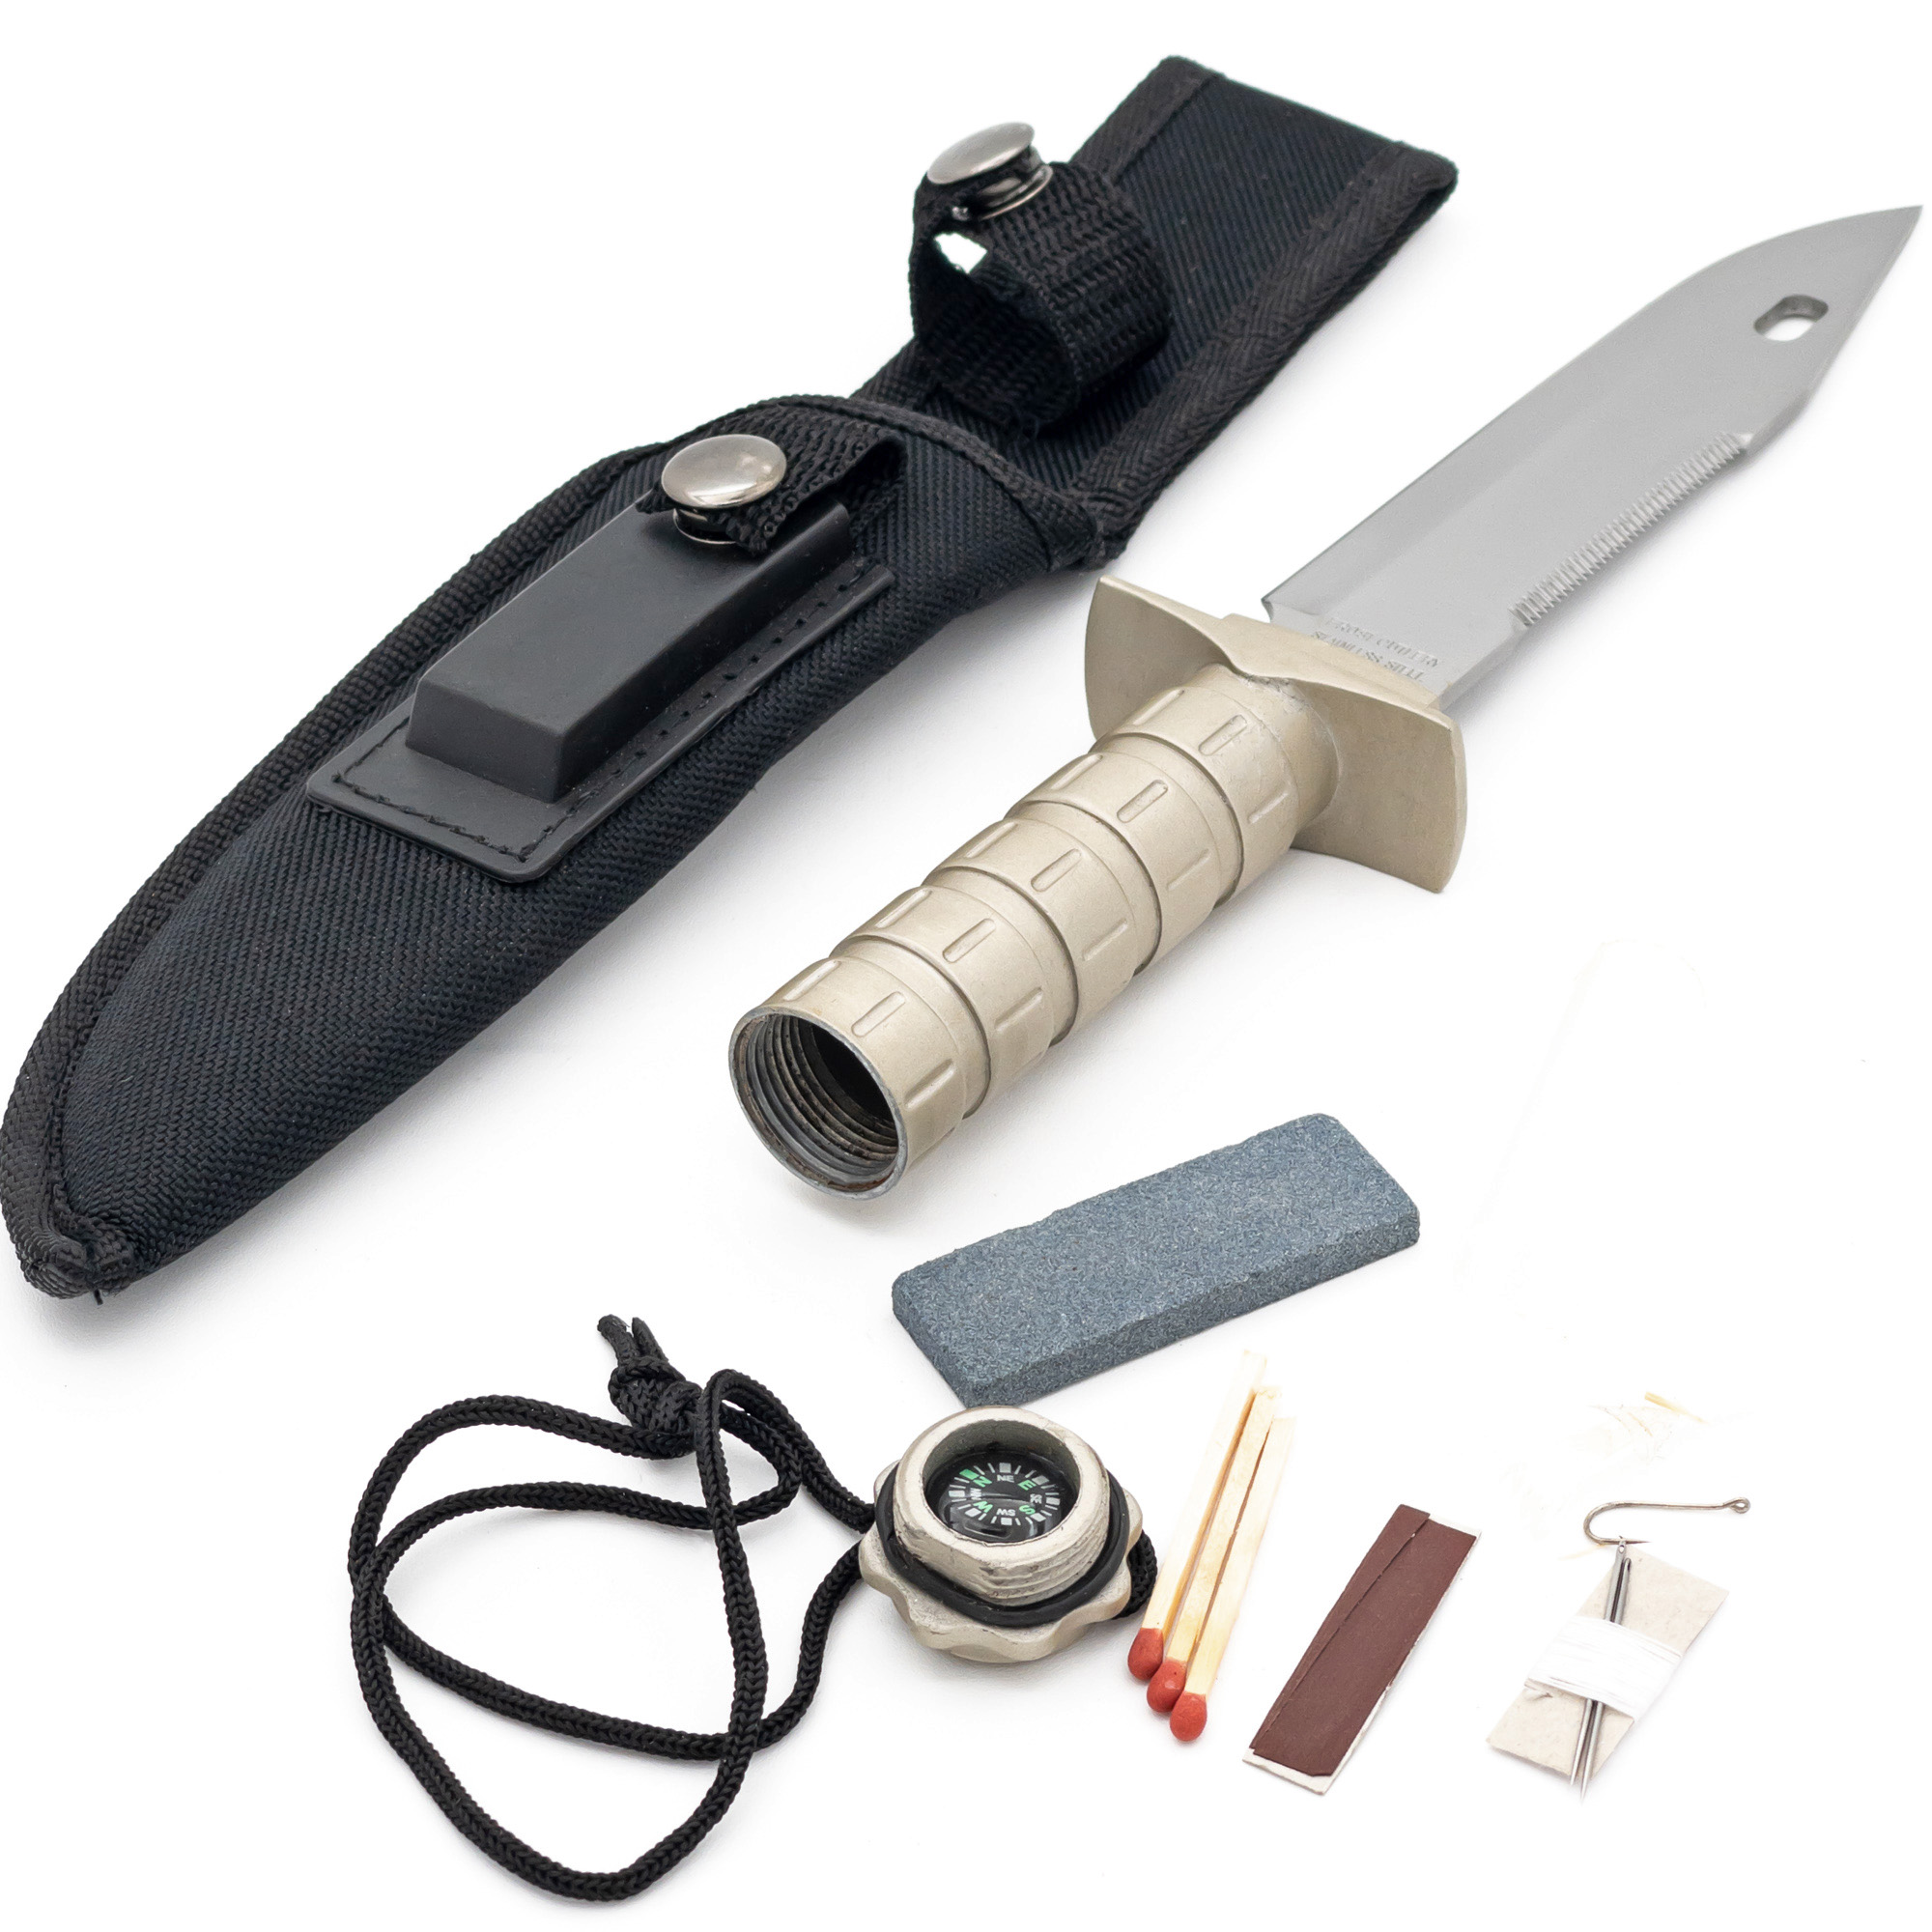 True North SURVIVAL Compartment KNIFE with Heavy Duty Sheath